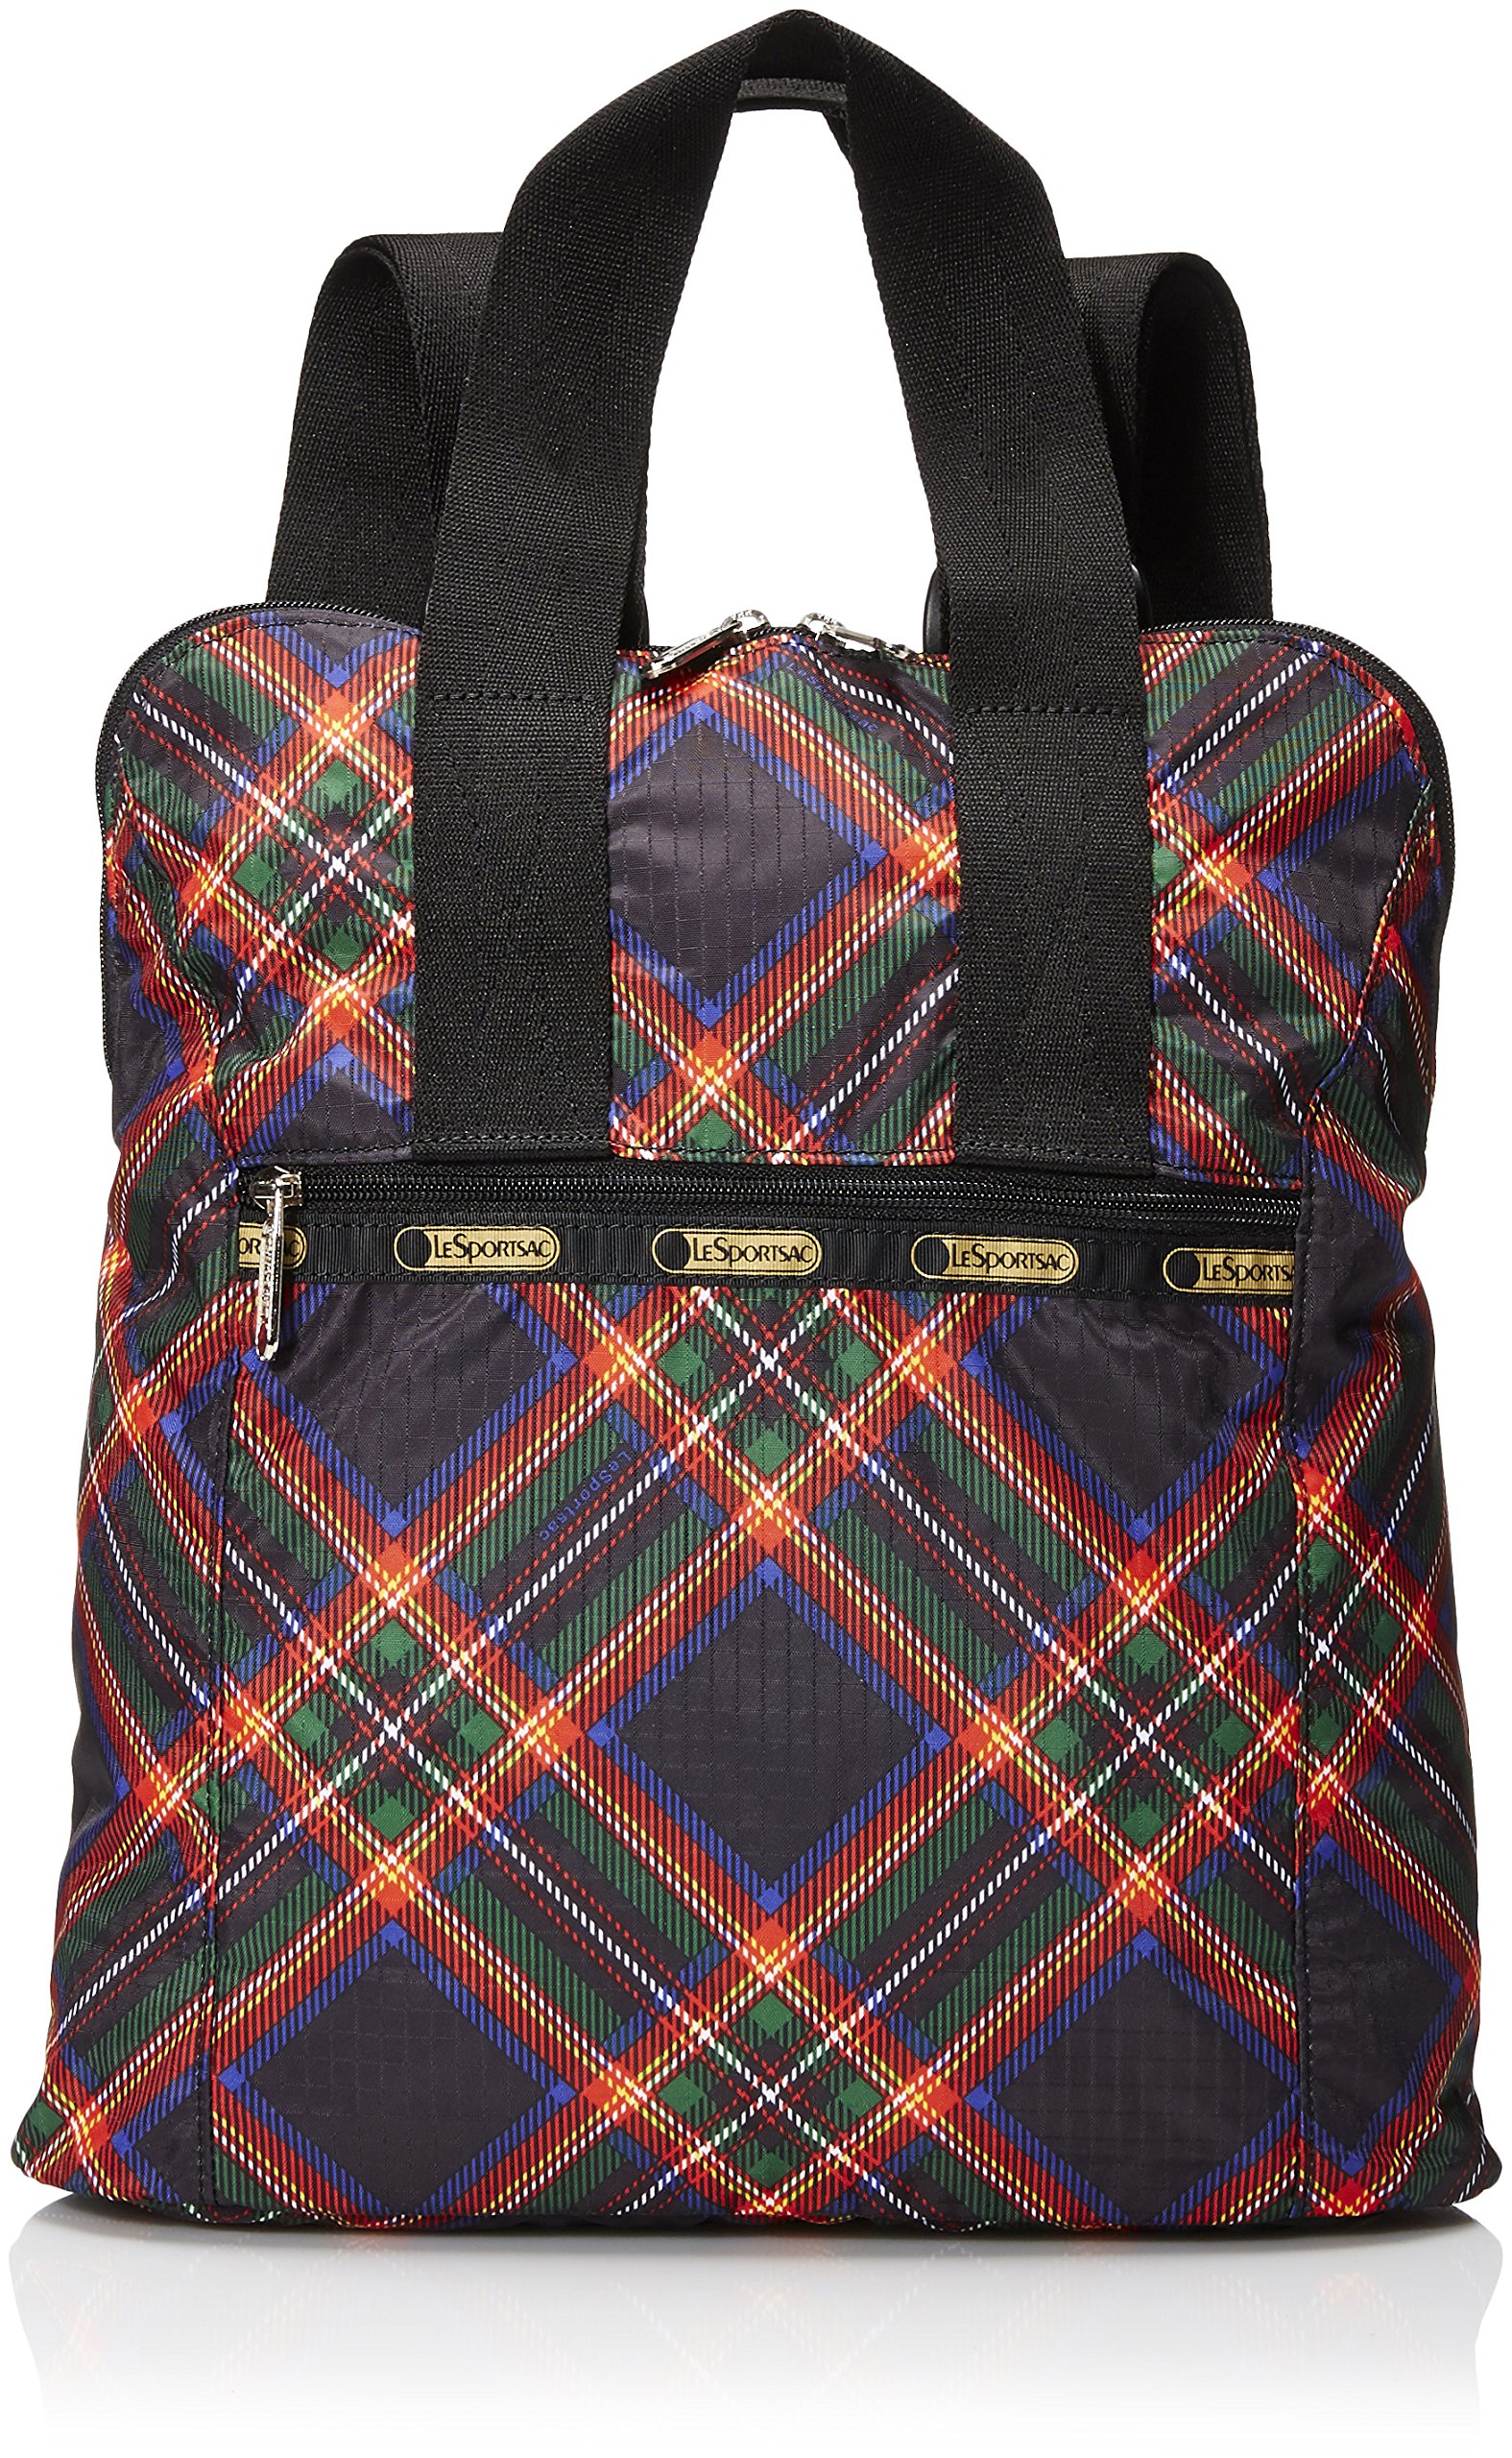 Everyday Backpack (Cozy Plaid Black) - image 1 of 4